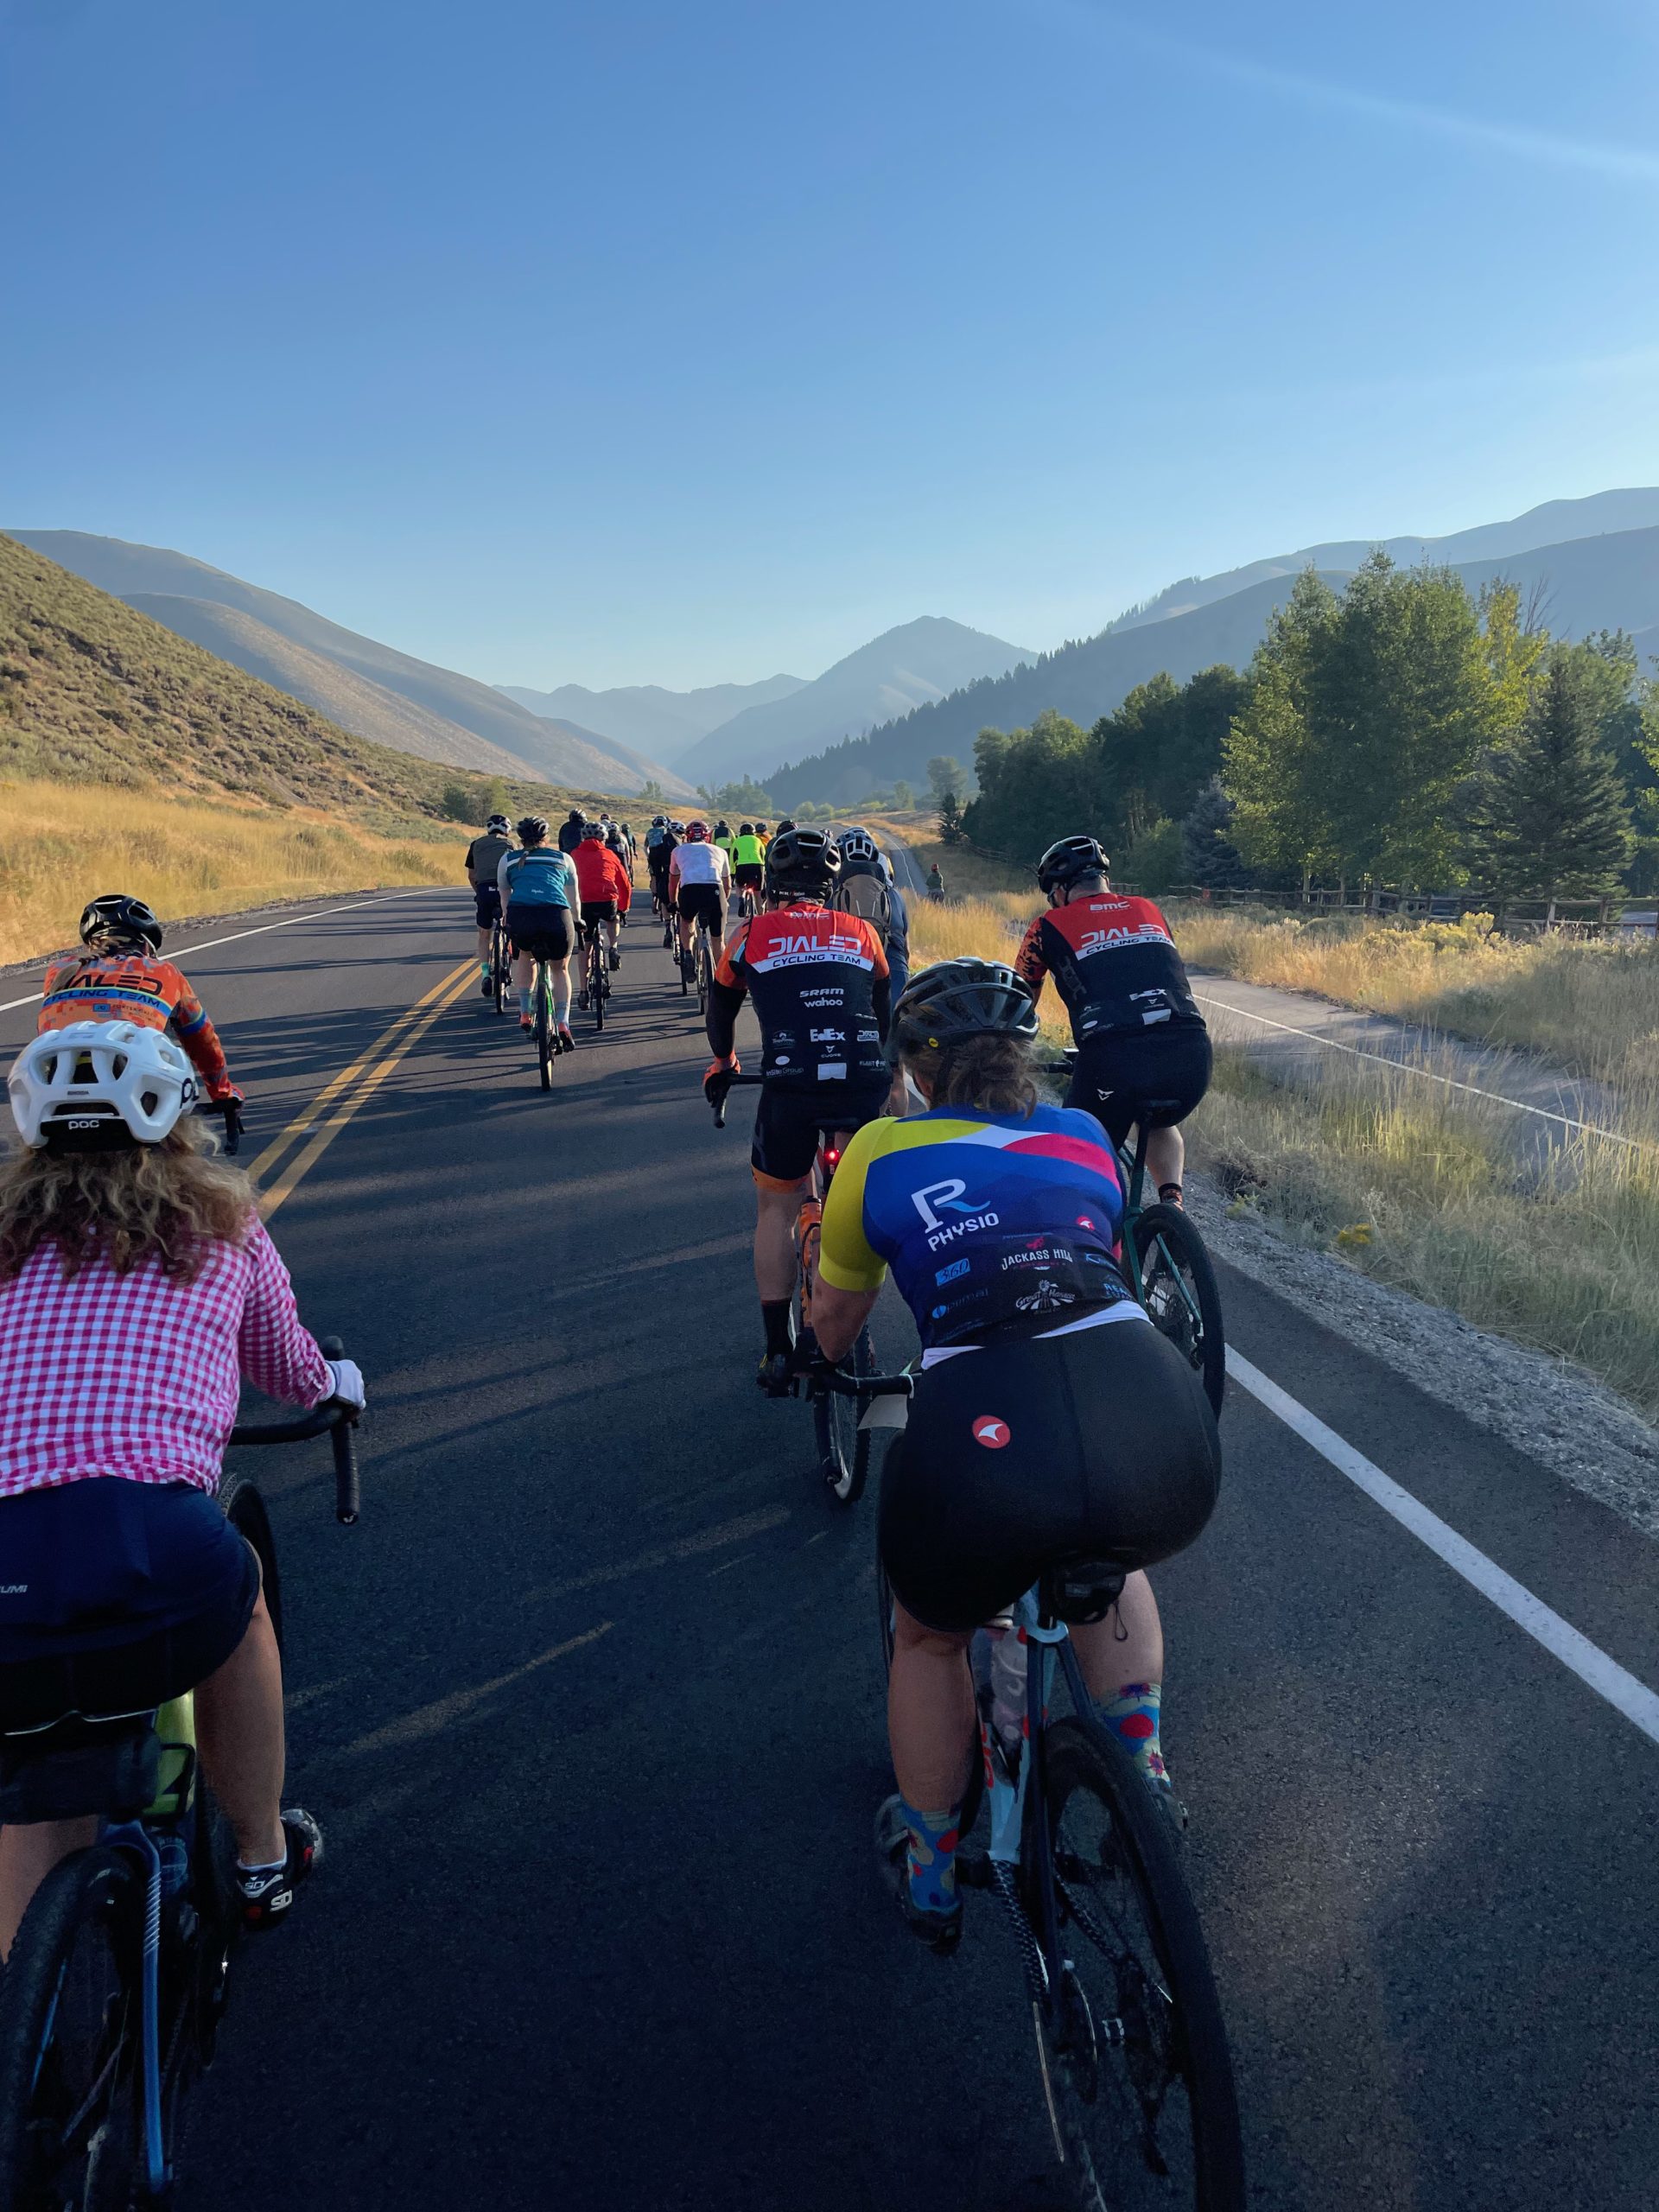 A group of over a dozen cyclists ride on a paved road in early morning with mountains in the distance